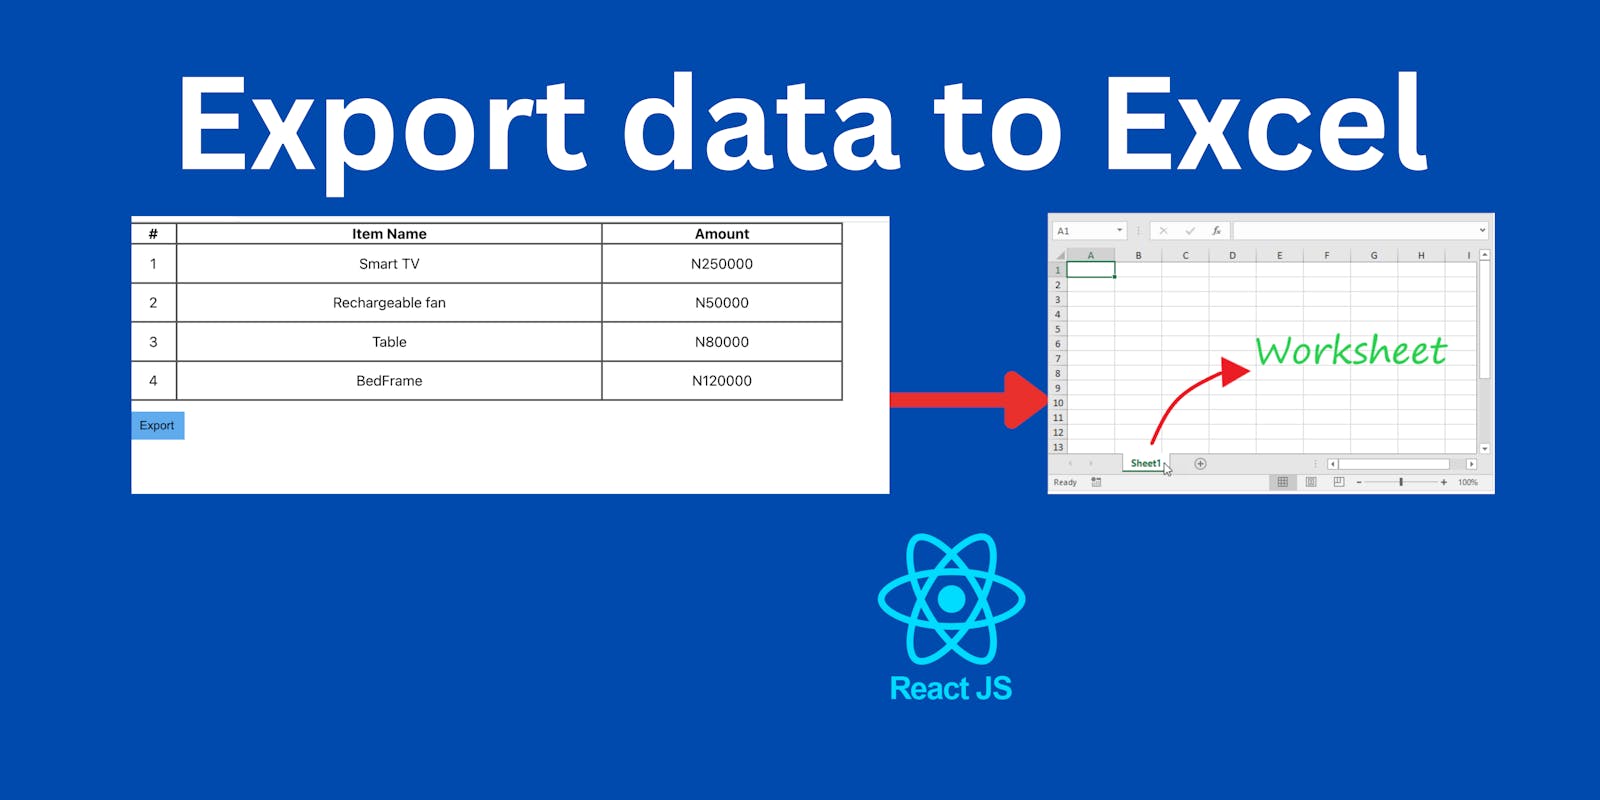 Making Data Exports Easier with SheetJS and React JS